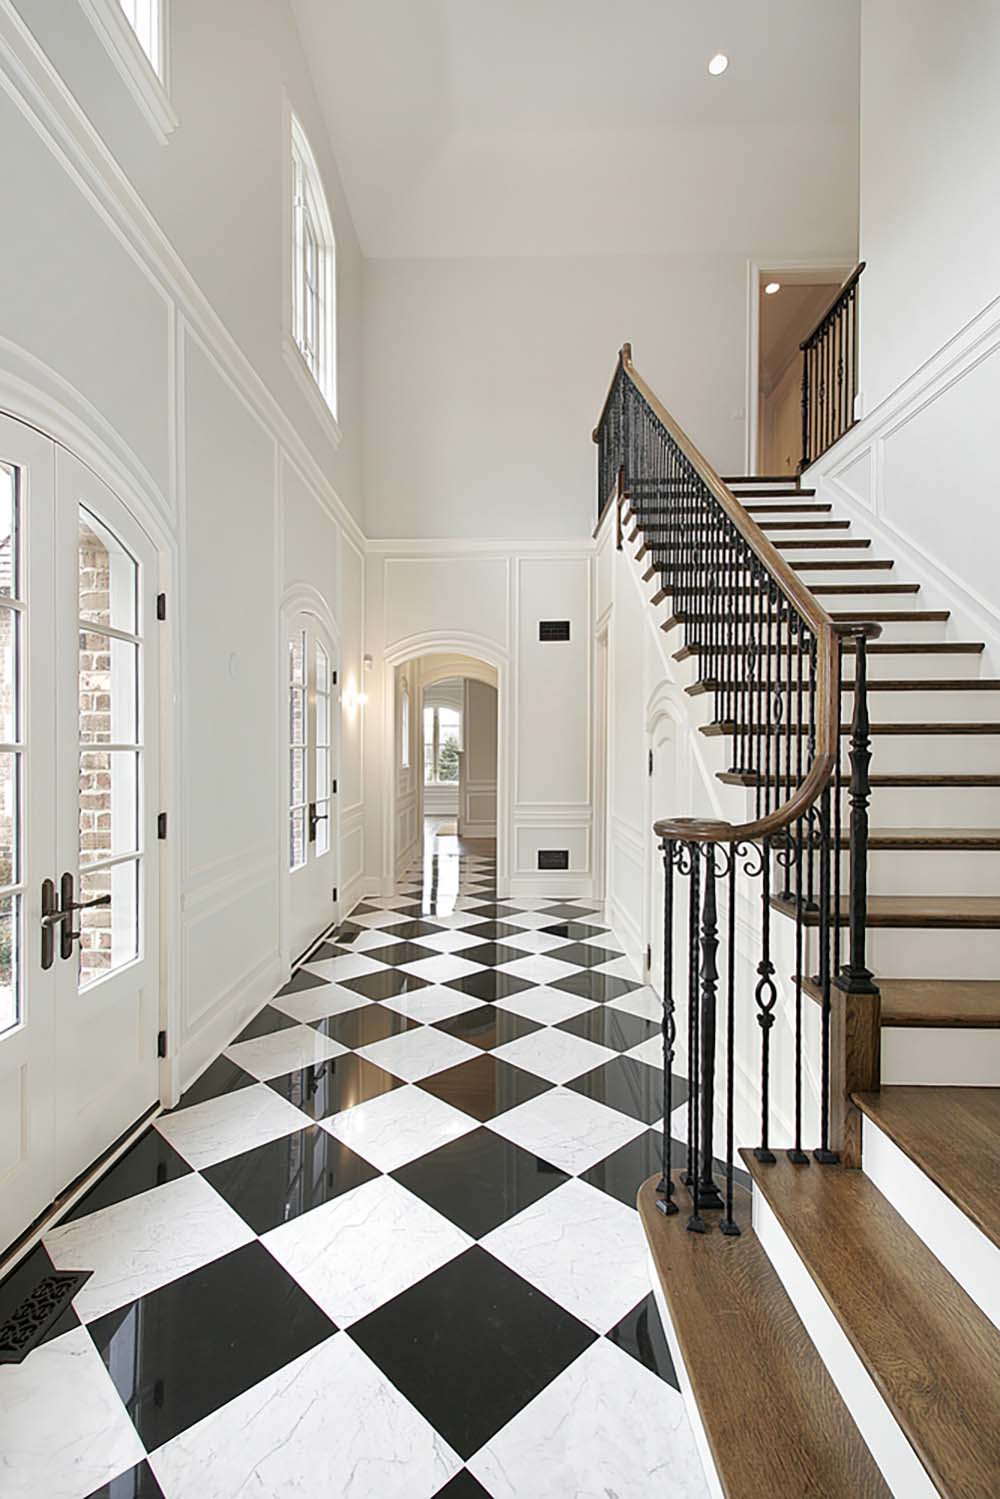 A foyer with white walls and a grand staircase with black and white checkerboard floors.